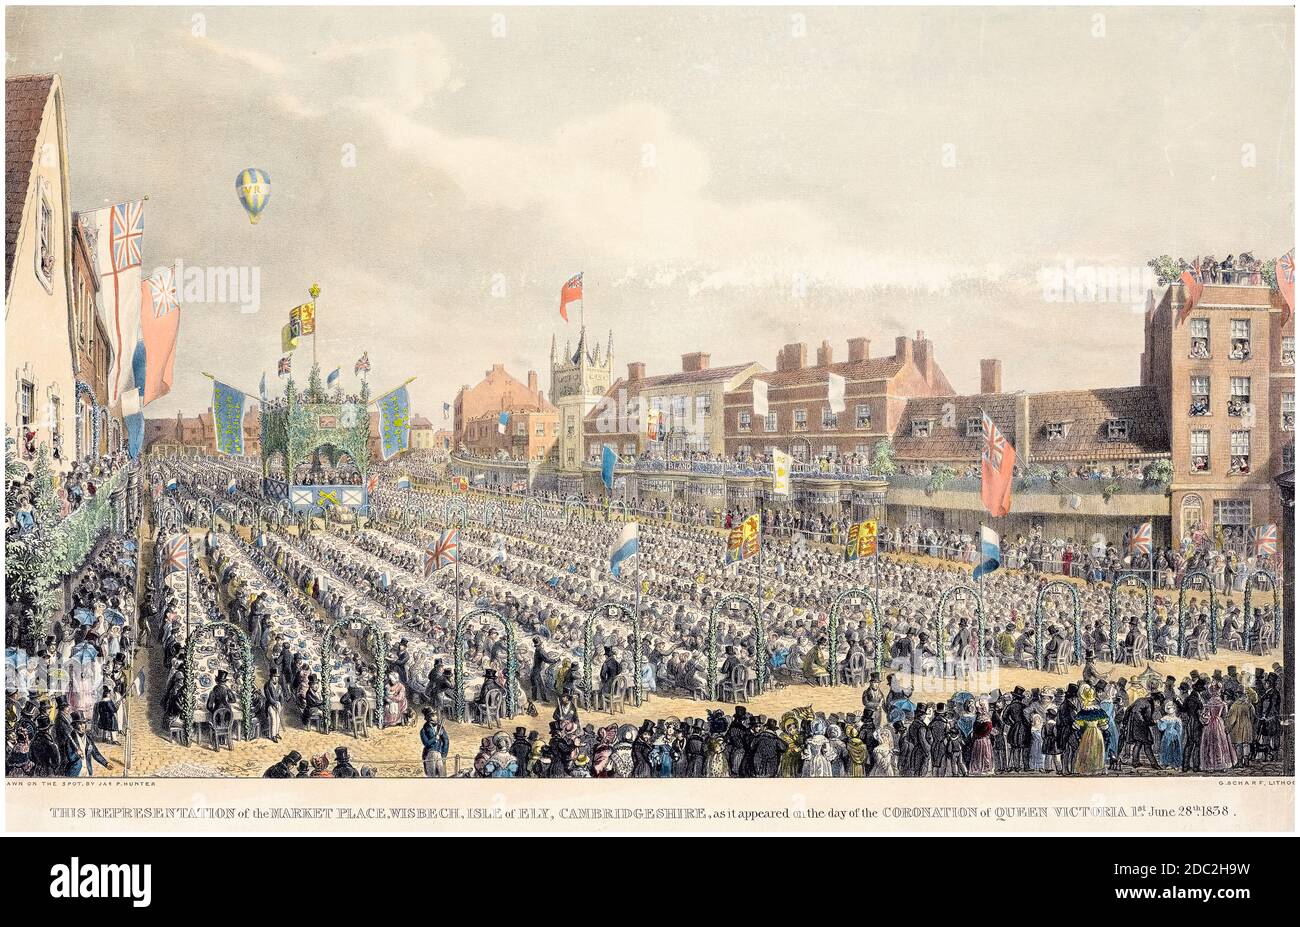 Large Street Party for 5000 people in the Market Place, Wisbech, Isle of Ely, Cambridgeshire, England on the 28th June 1838 to celebrate the Coronation of Queen Victoria, print by George Johann Scharf after JP Hunter, 1838 Stock Photo